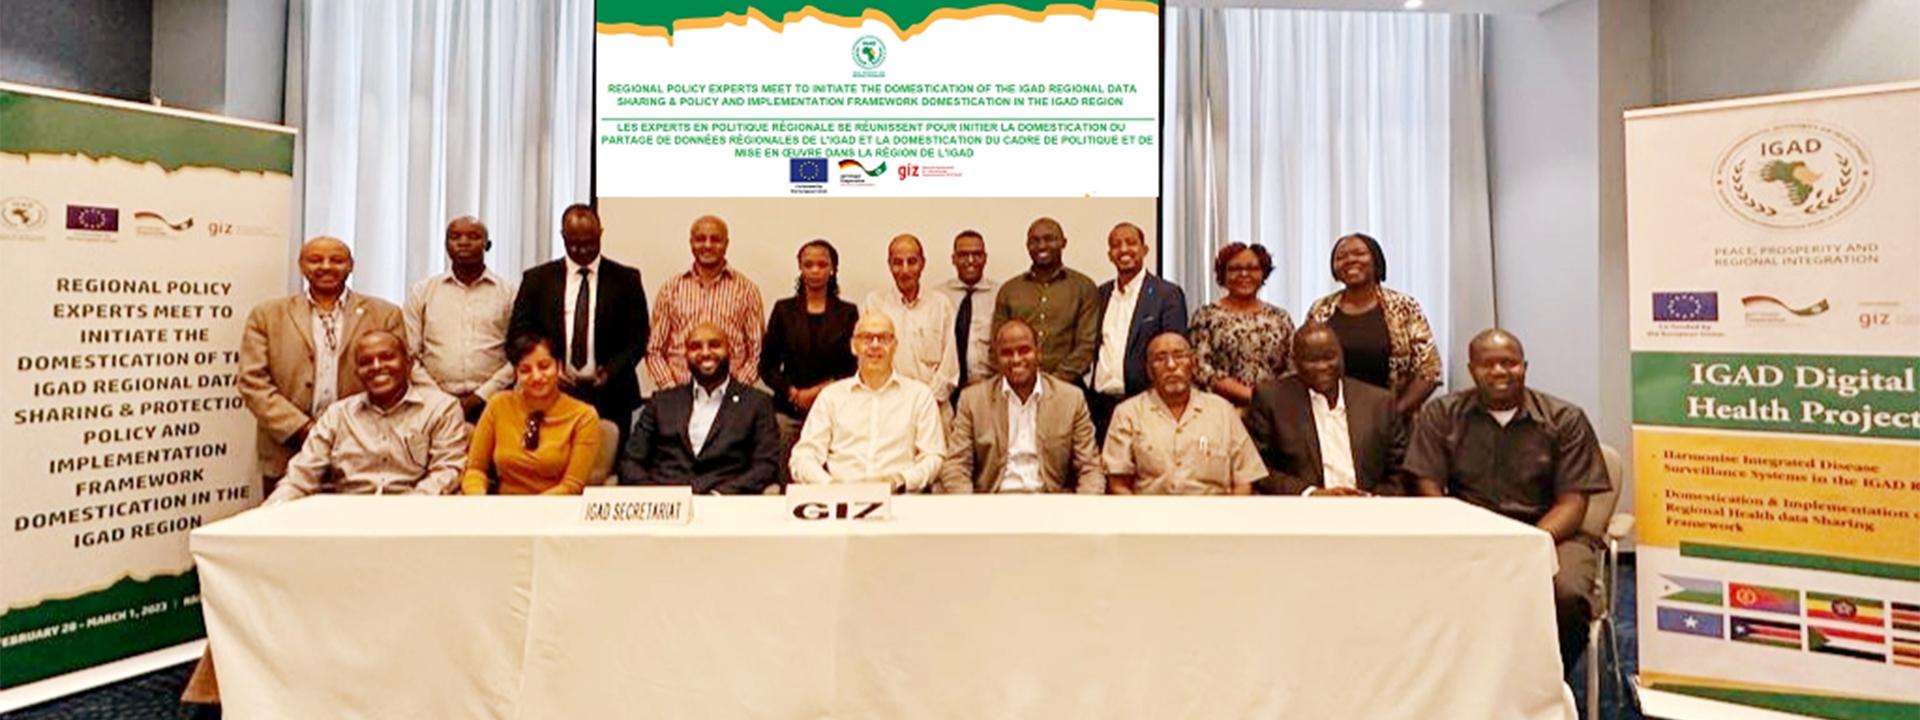 IGAD Policy Facilitators Meet to Initiate the Domestication of the IGAD Regional Health Data Sharing and Protection Policy Framework in the IGAD Region